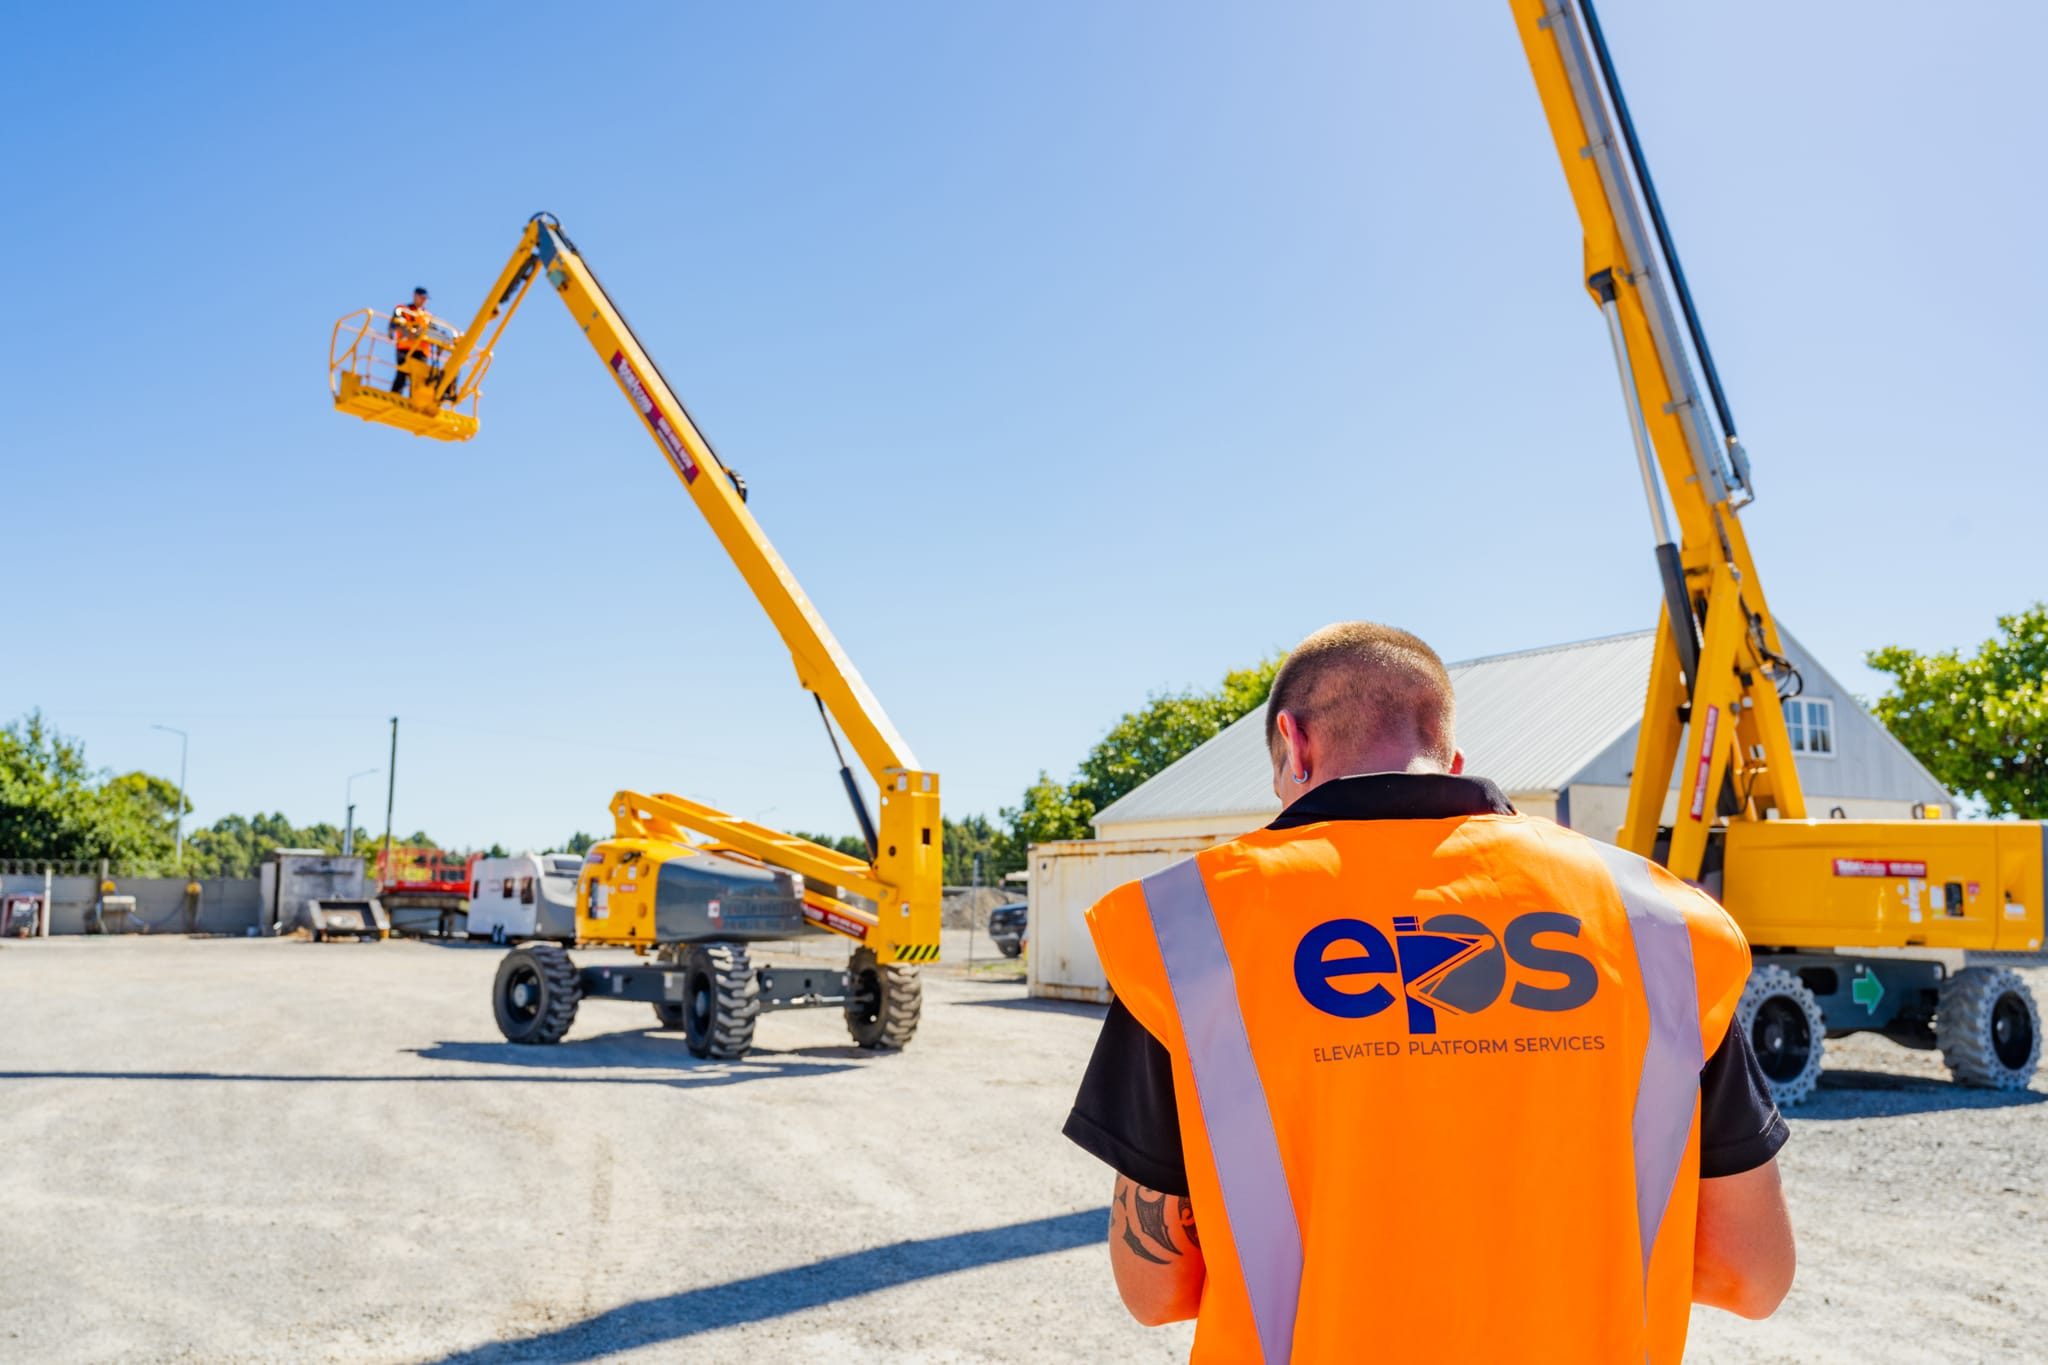 A boom lift being inspected in Christchurch, New Zealand by EPSNZ